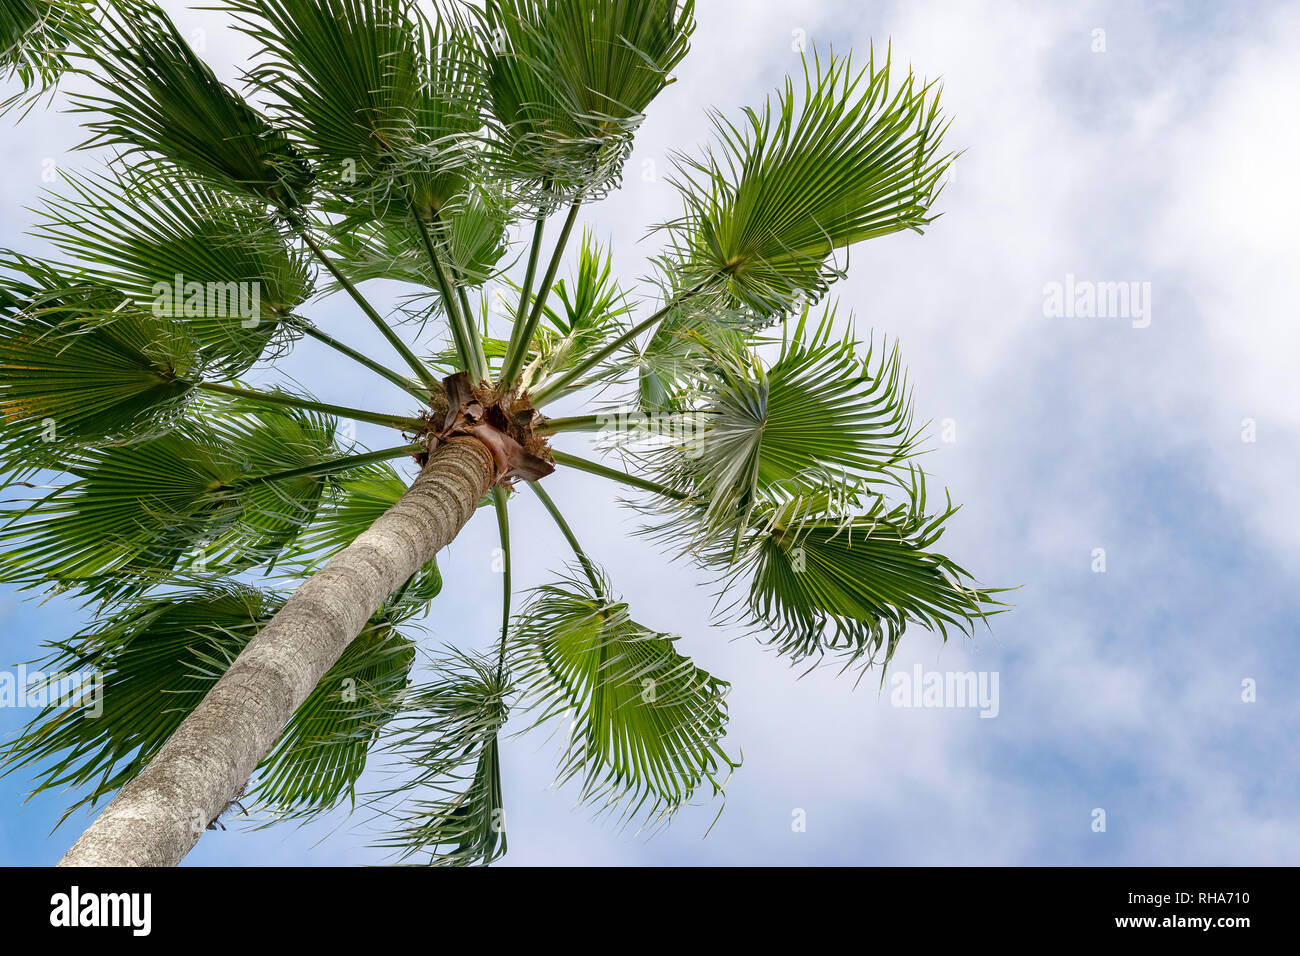 Tropical fan shaped (palmate) palm tree against clouds in blue sky Stock Photo